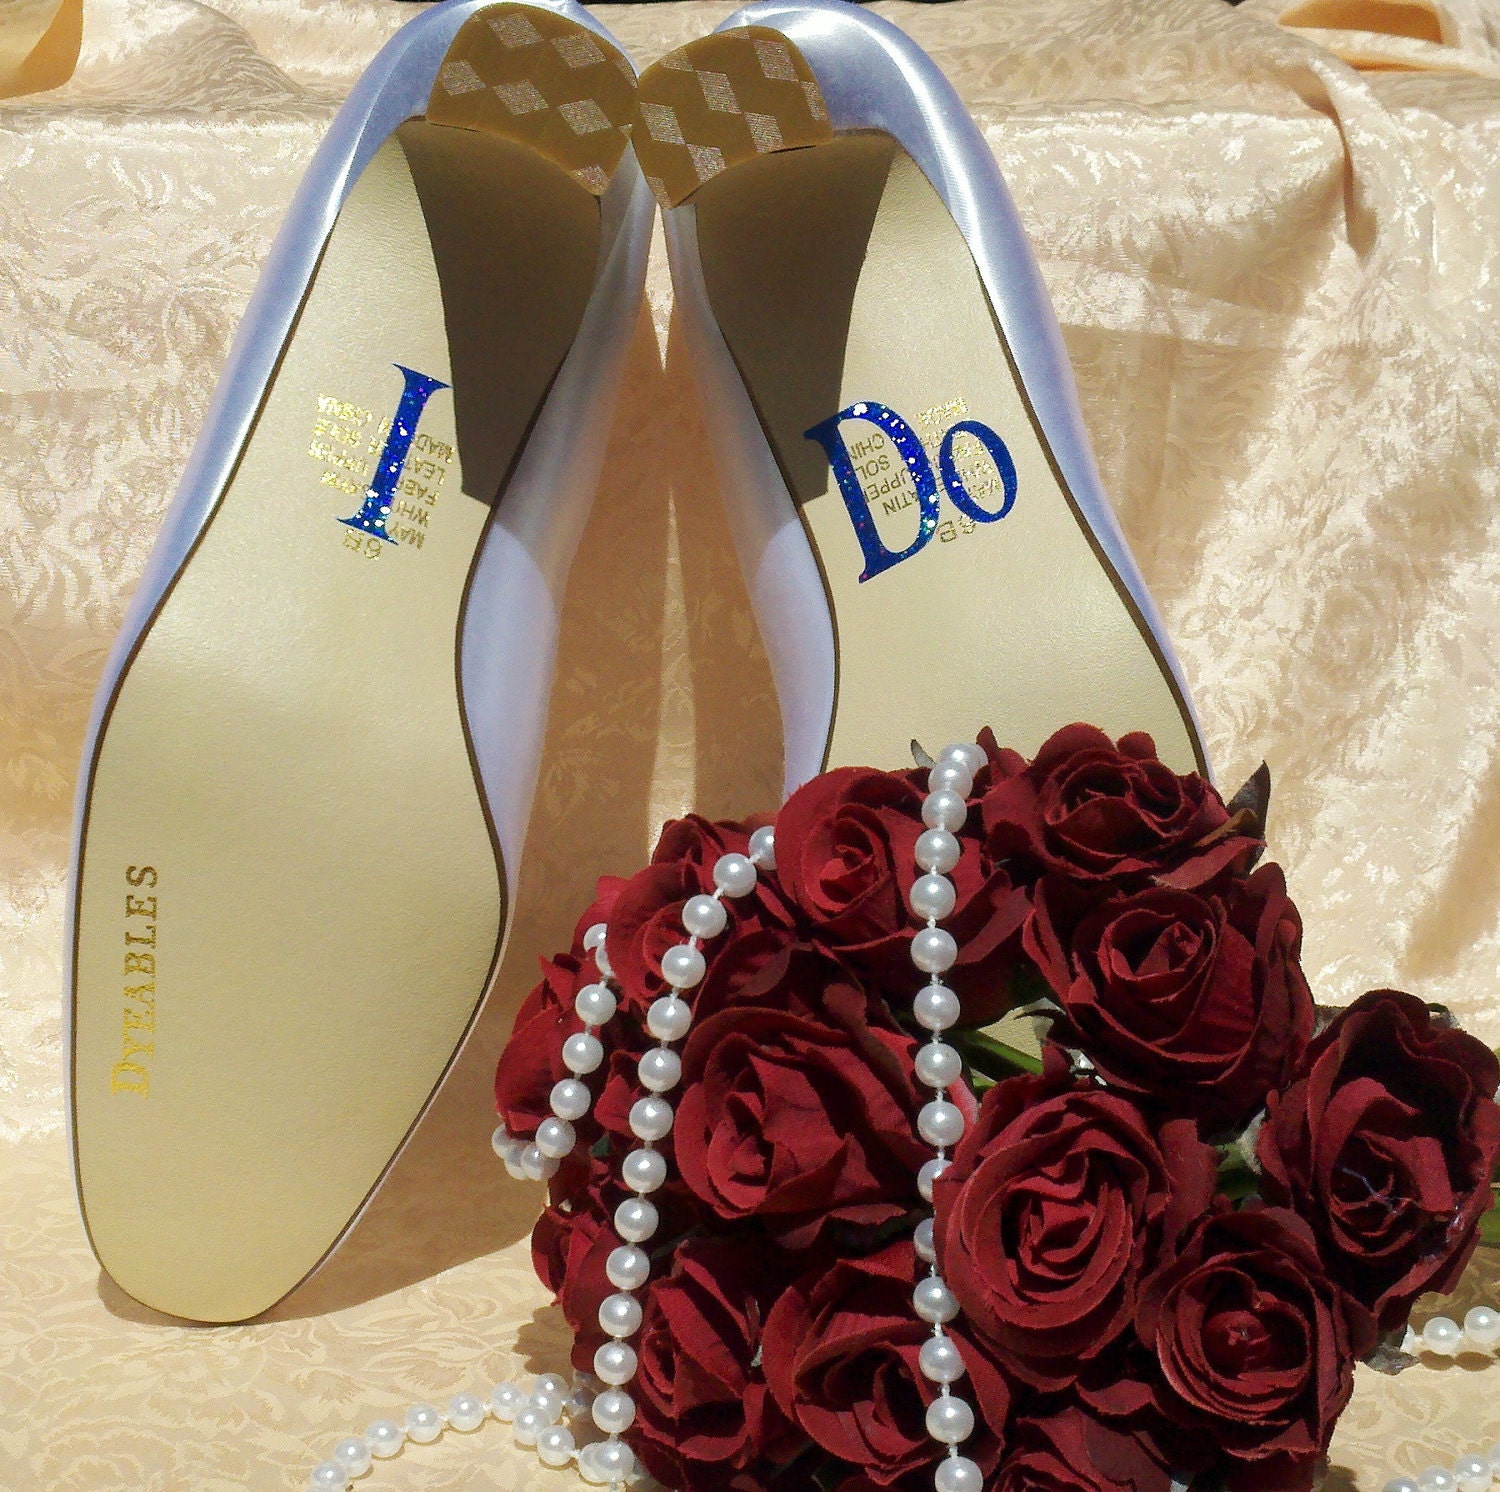 Bling out your bridal shoe and add rhinestone embellishments to your